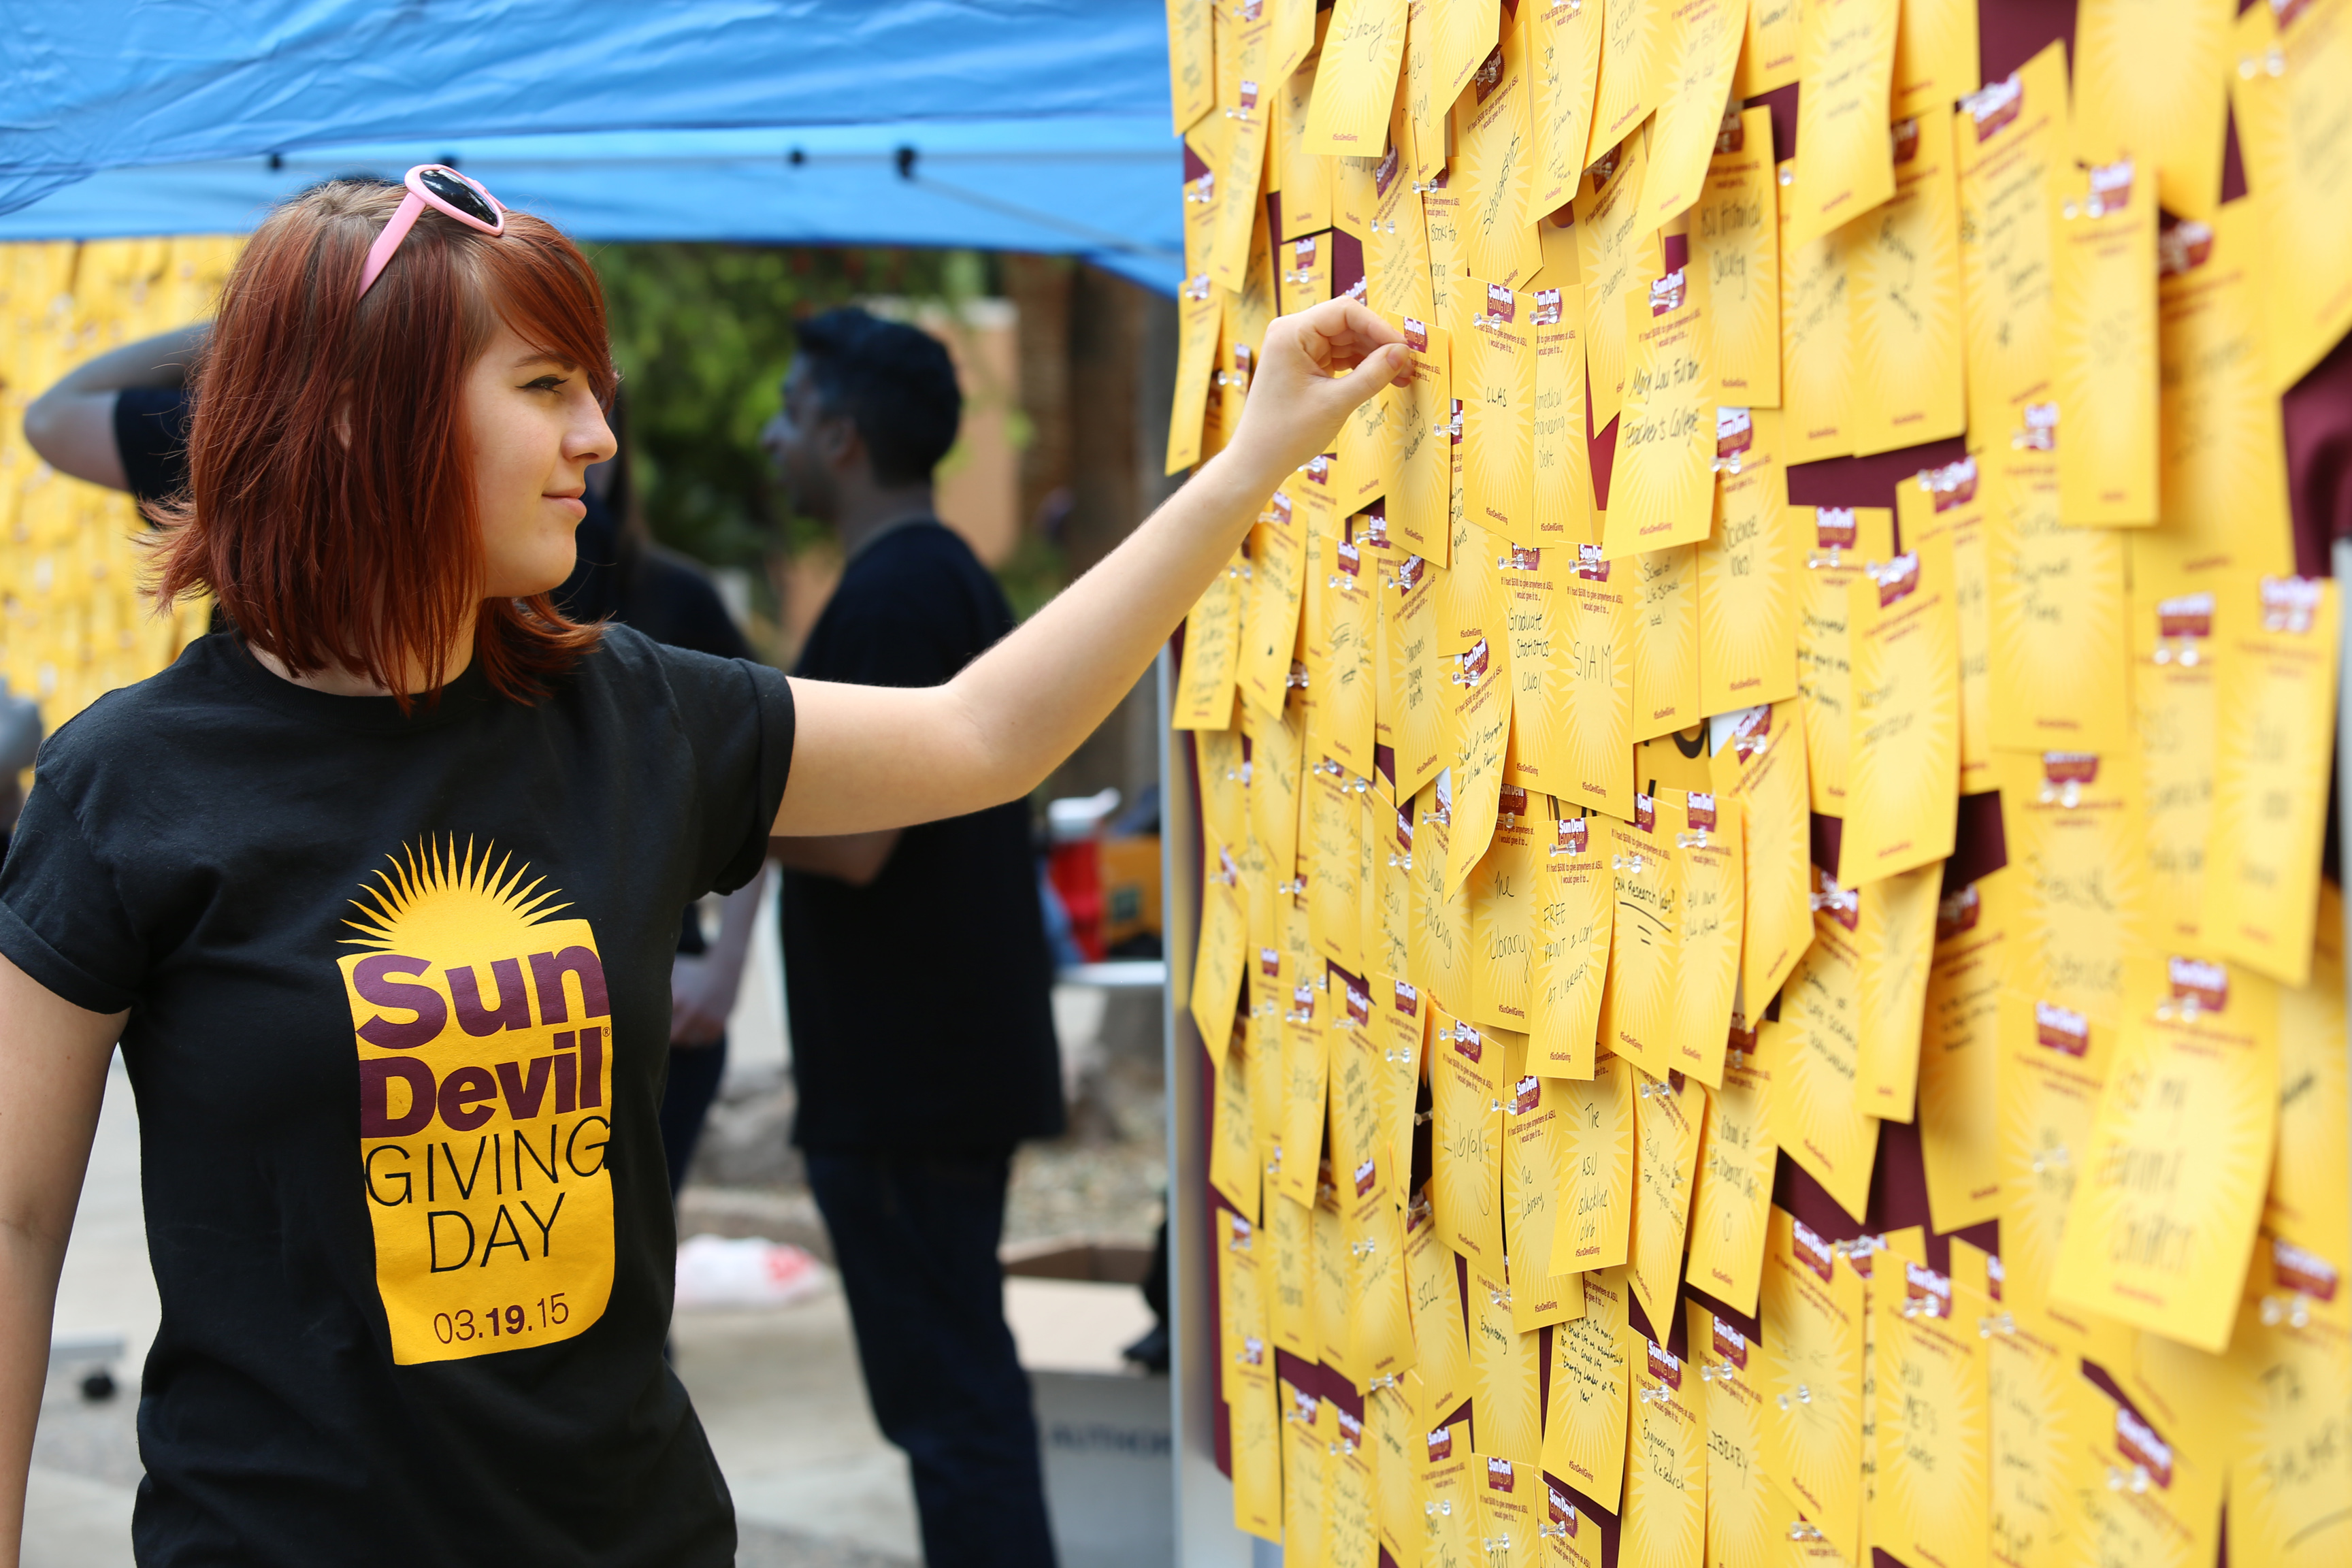 A student participates in Sun Devil Giving Day by pinning a note to a board.